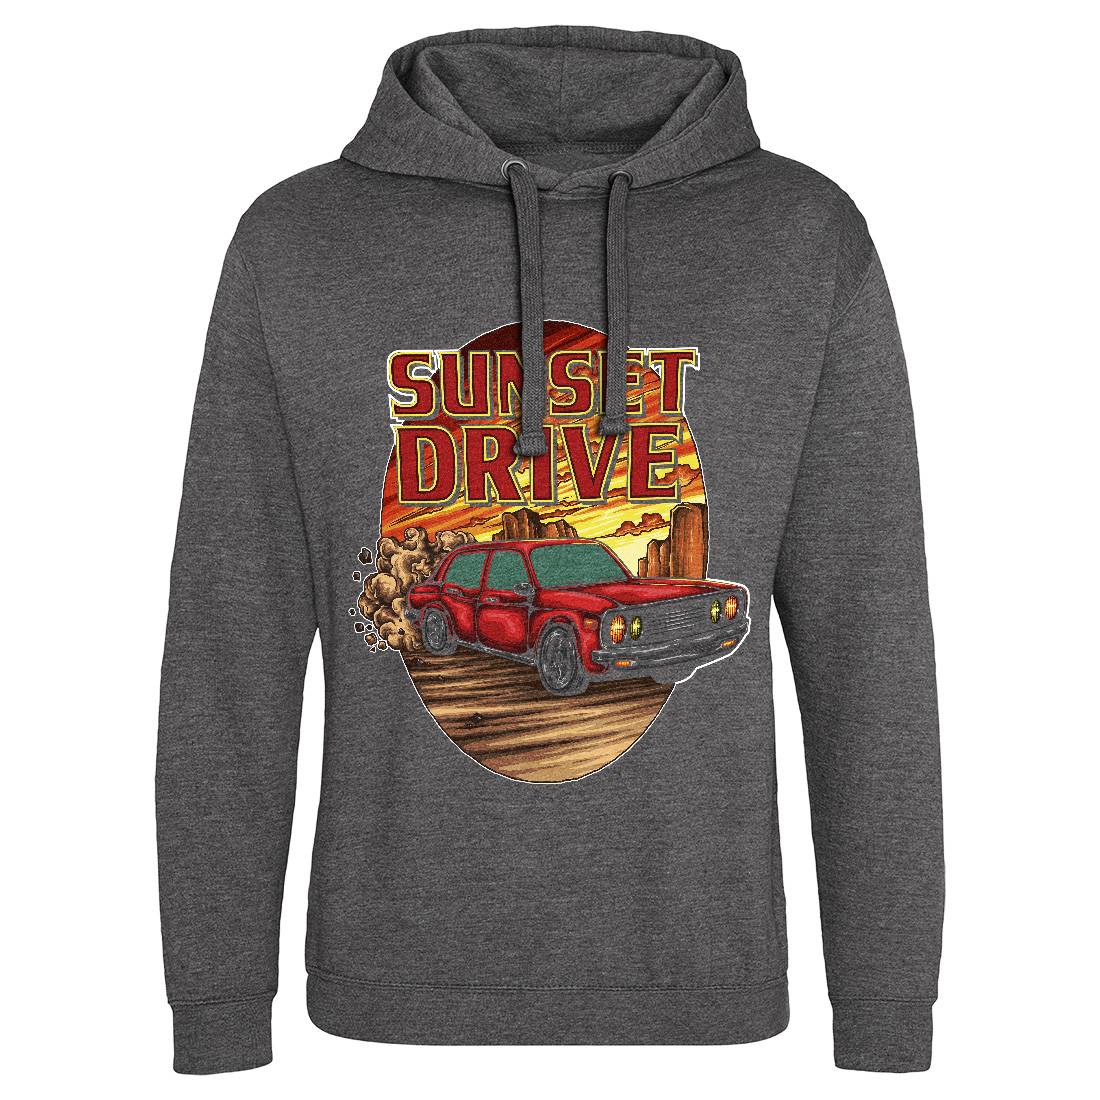 Sunset Drive Mens Hoodie Without Pocket Cars A472